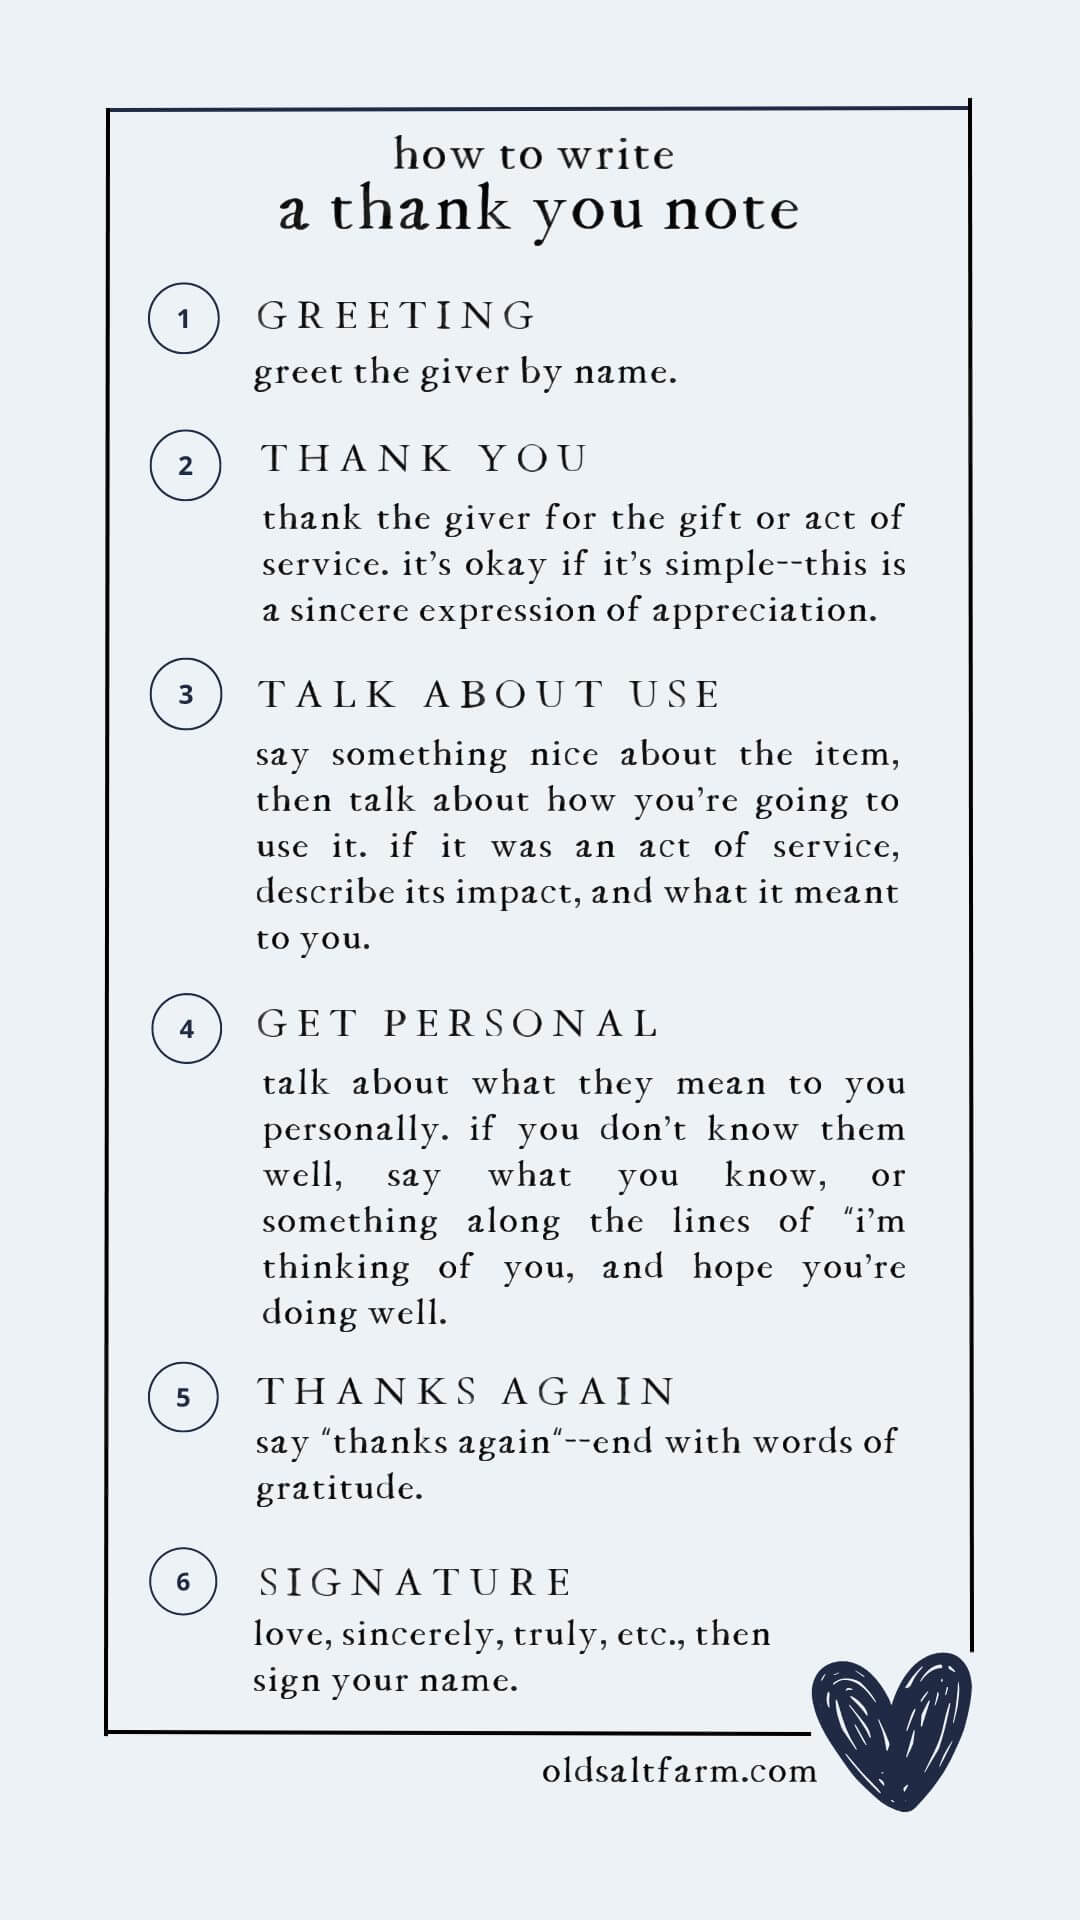 How To Write a Thank You Note in 6 Easy Steps